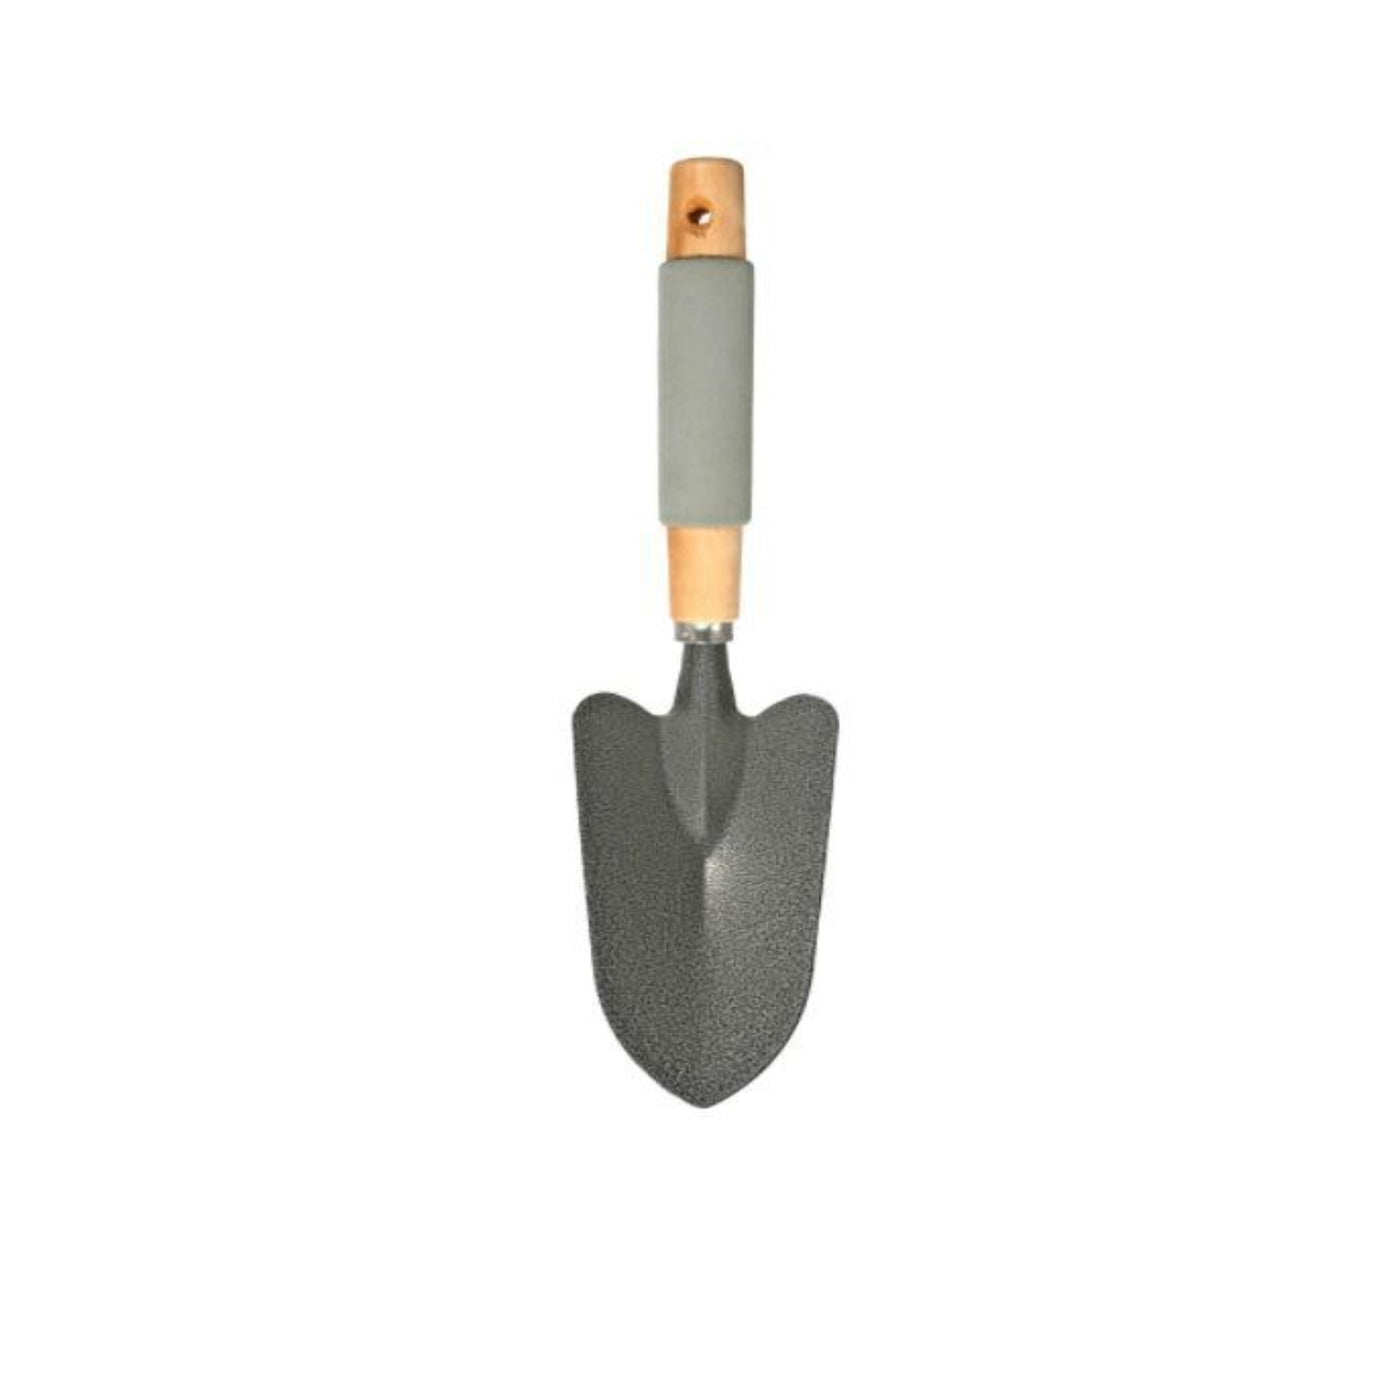 The Hand Trowel Soft Mulberry – Mulch.